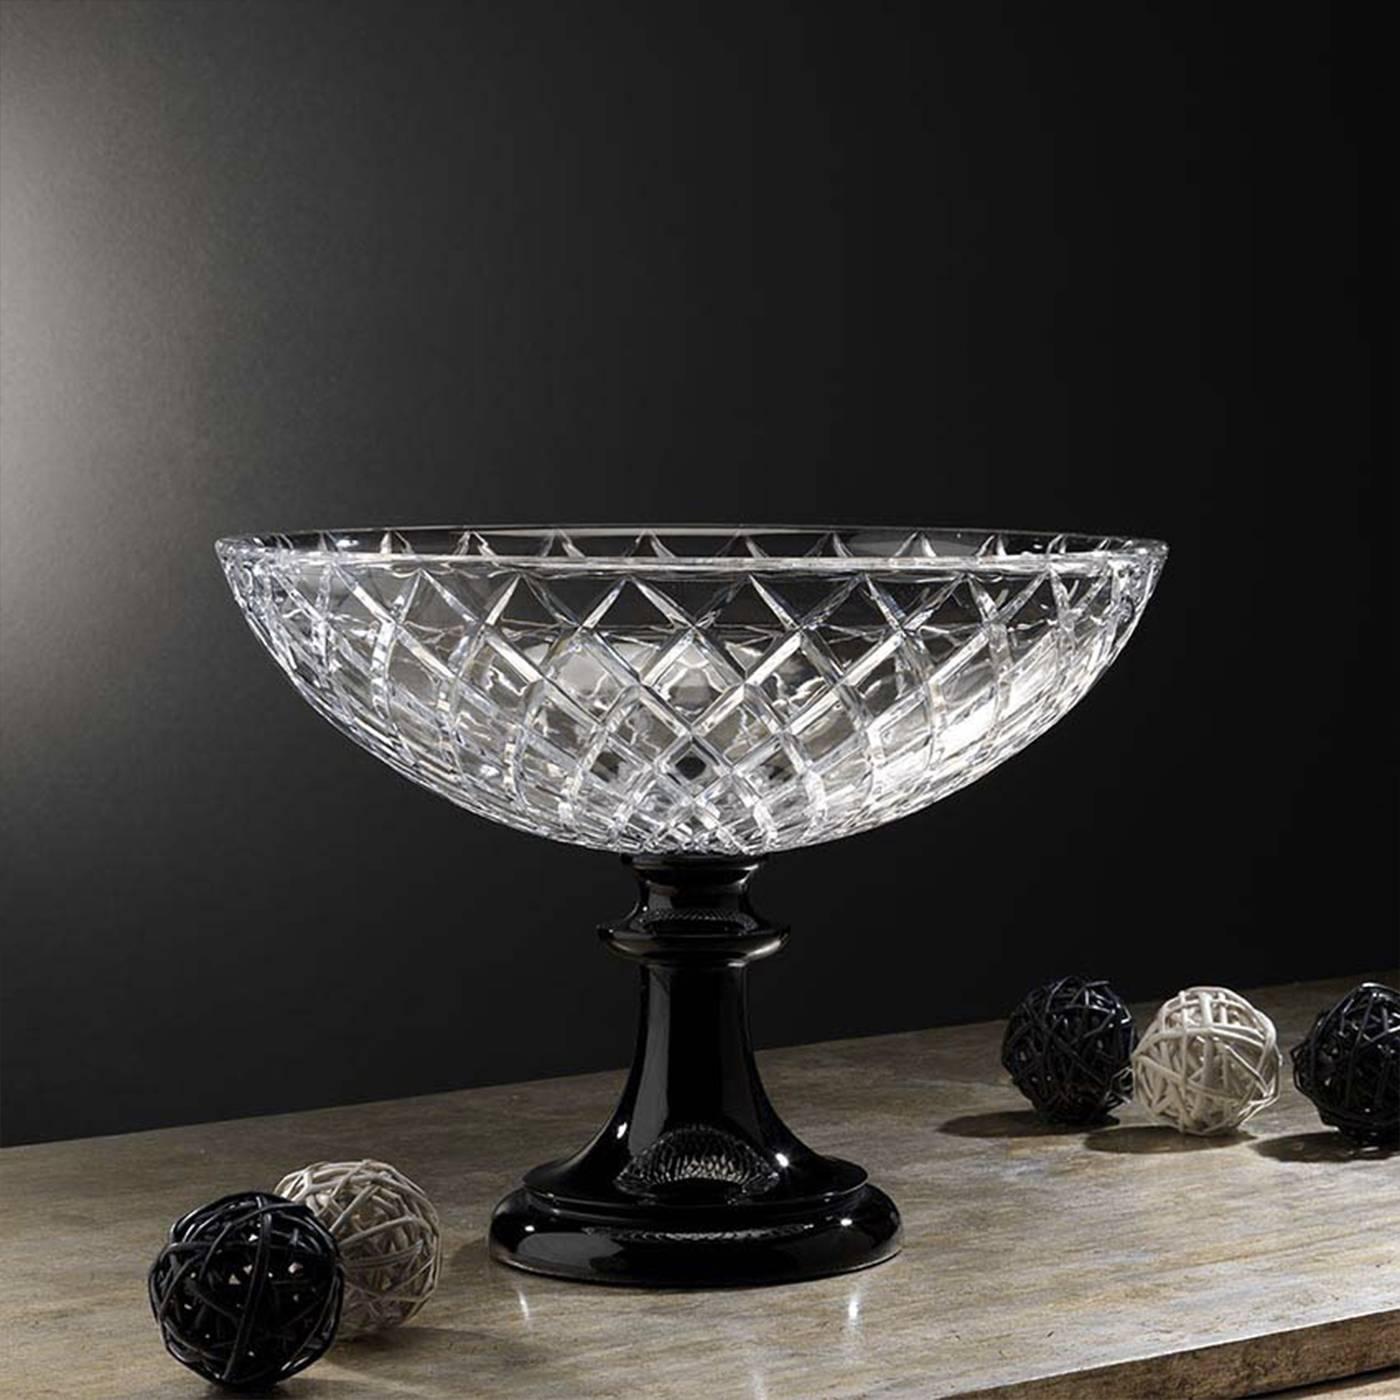 This harmonic clear and black blown crystal centerpiece will add an elegant accent to any table. The purity and transparency of the bowl, featuring a striking beveled mesh pattern, contrast with the black pedestal base. A decorative piece that